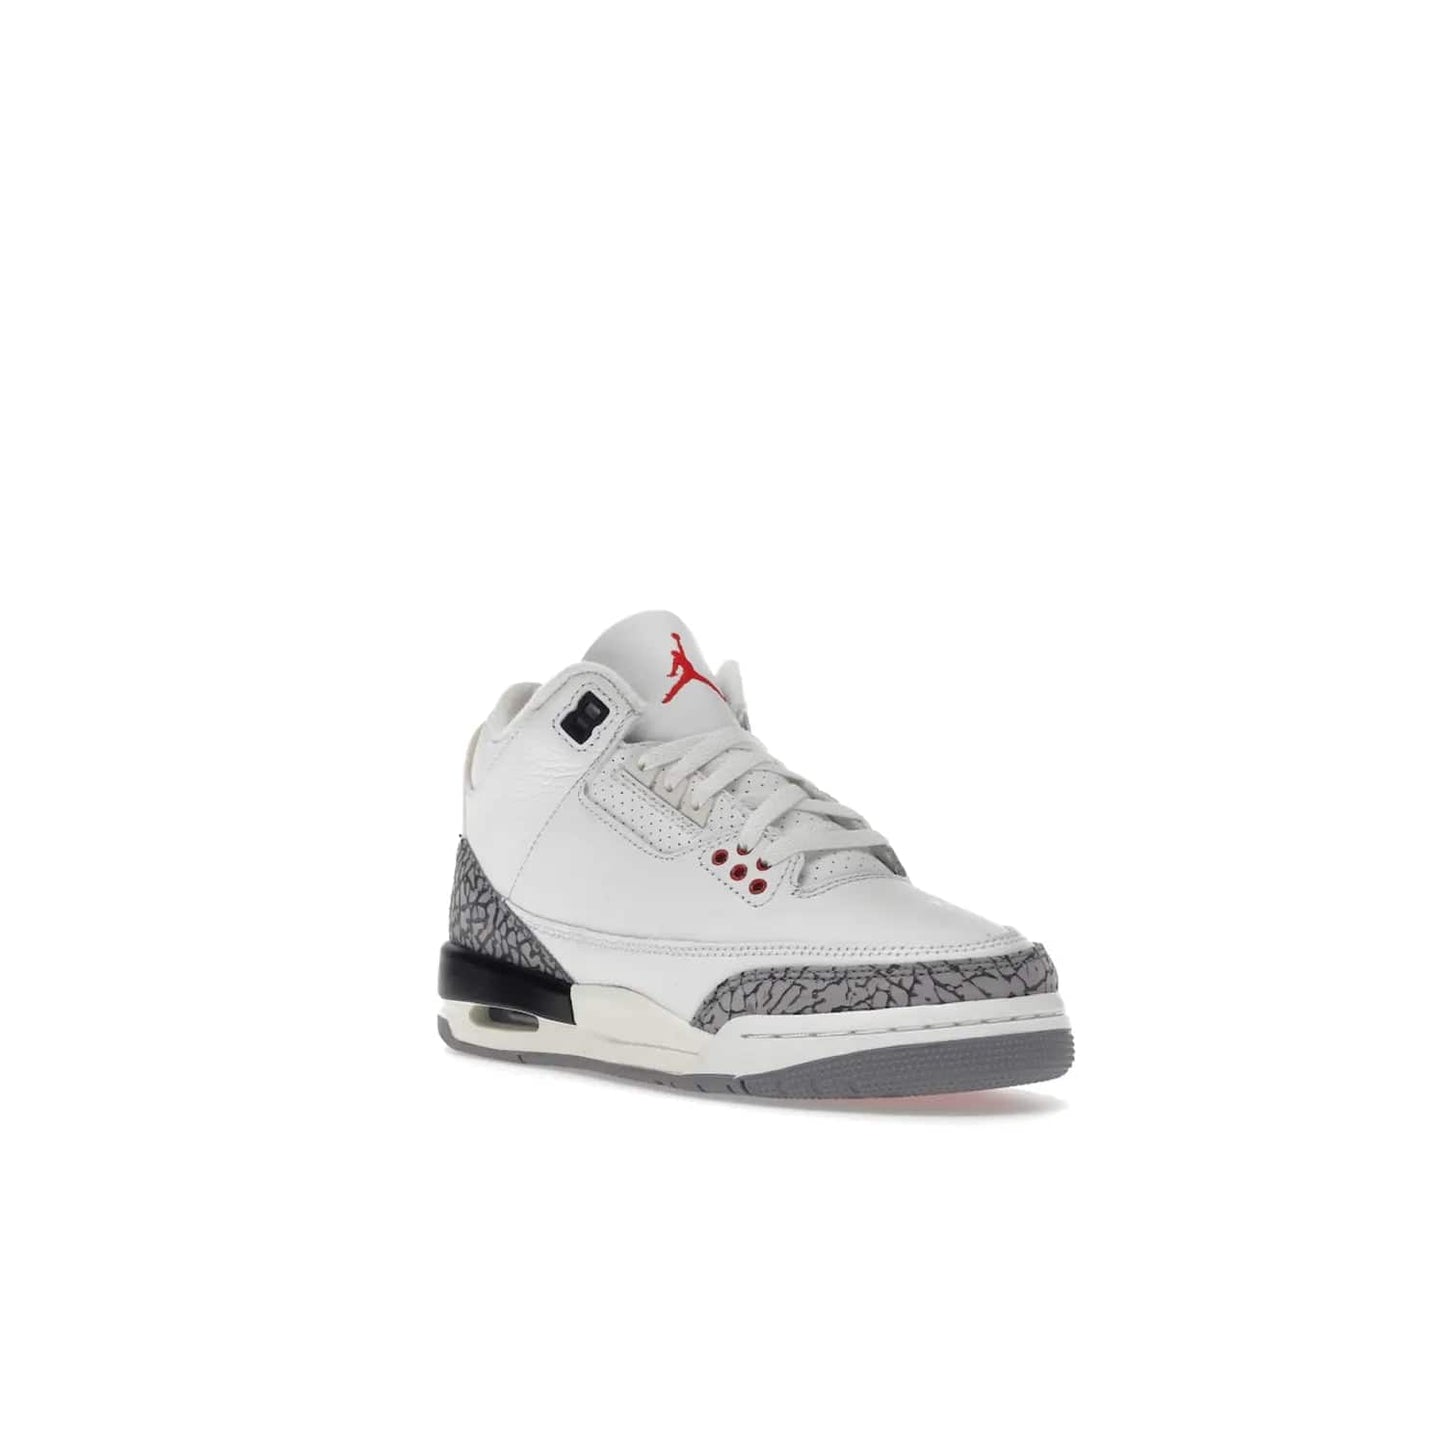 Jordan 3 Retro White Cement Reimagined (GS) - Image 6 - Only at www.BallersClubKickz.com - Grab the perfect blend of modern design and classic style with the Jordan 3 Retro White Cement Reimagined (GS). Features Summit White, Fire Red, Black, and Cement Grey colorway, iconic Jordan logo embroidered on the tongue, and “Nike Air” branding. Limited availability, get your pair before March 11th 2023.